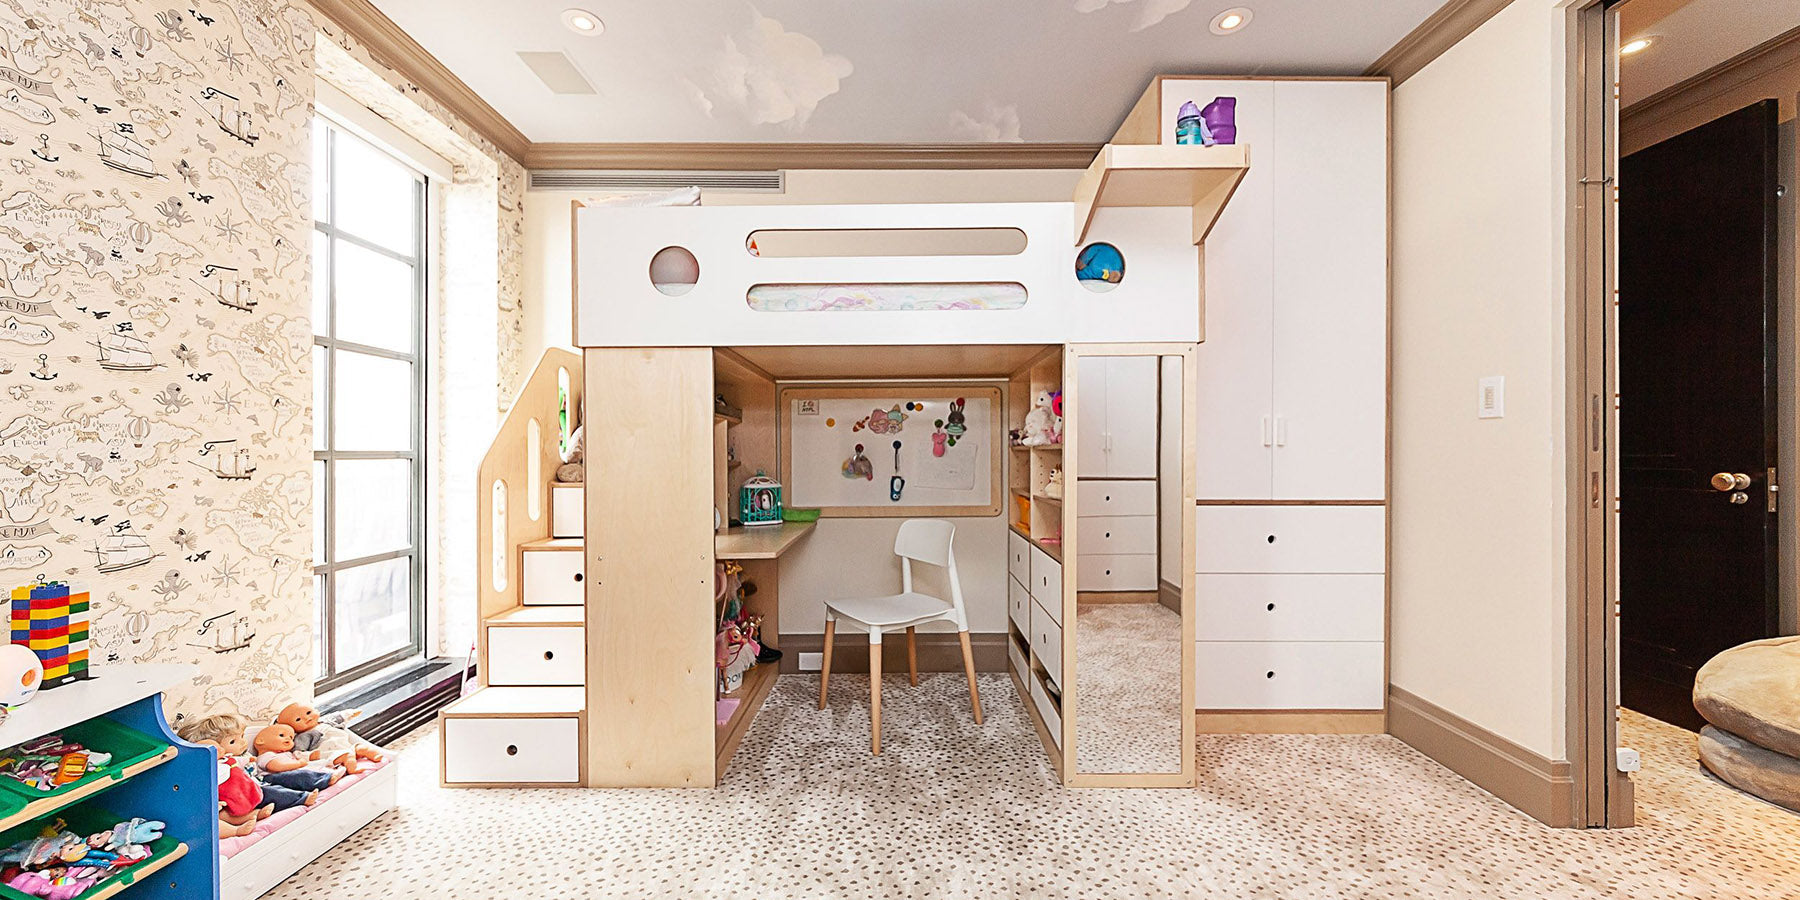 Spacious children's room featuring a custom house-shaped bunk bed with a study area and playful wallpaper.